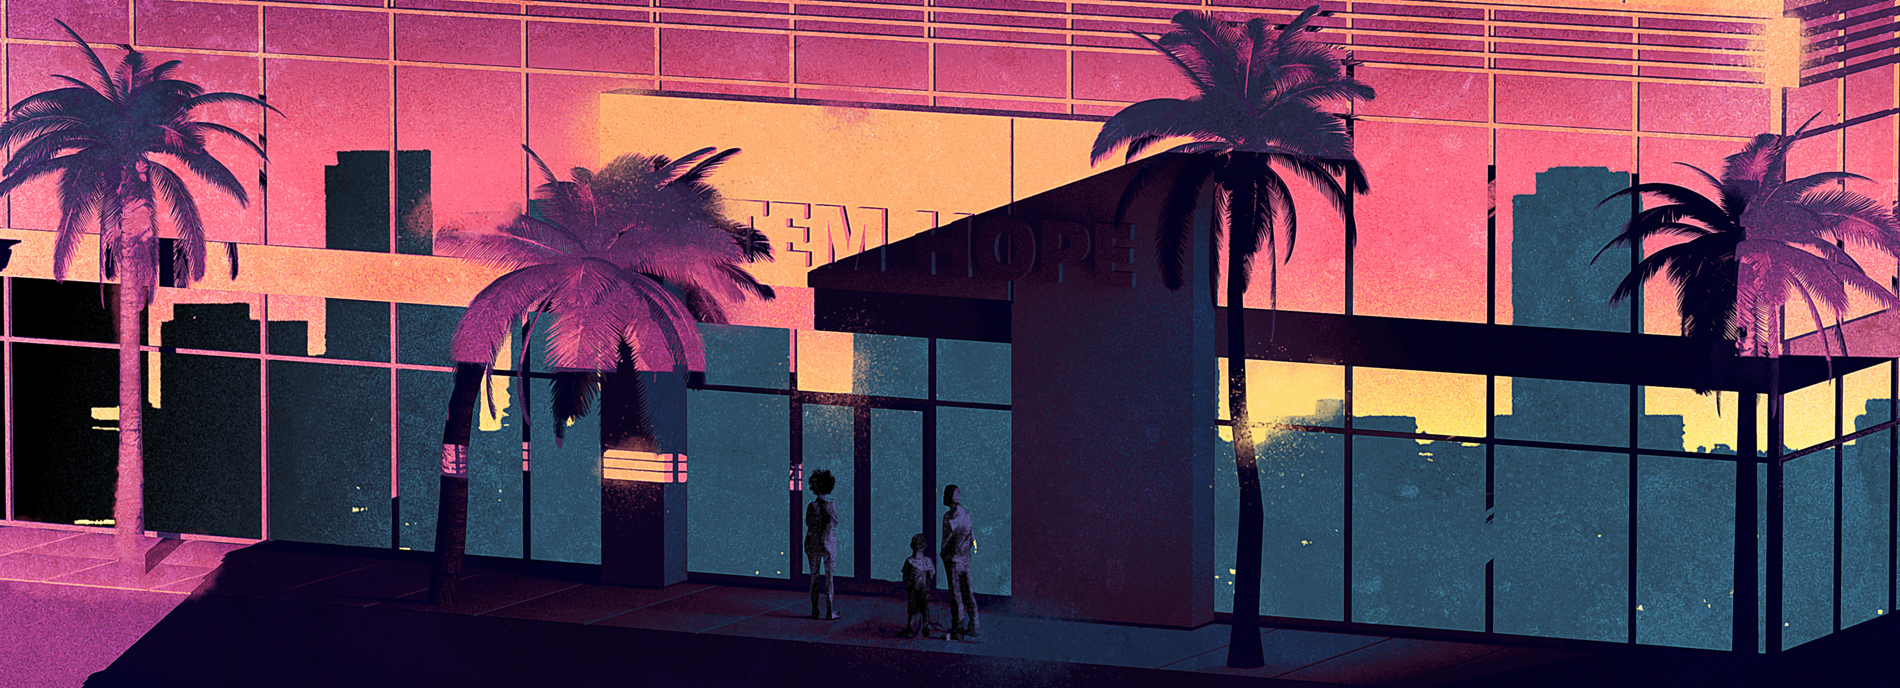 Parents stand around a closed stem cell research lab in a downtown evocative of Los Angeles or Miami. It is implied that the lab is closed, suggesting duplicity and betrayal.